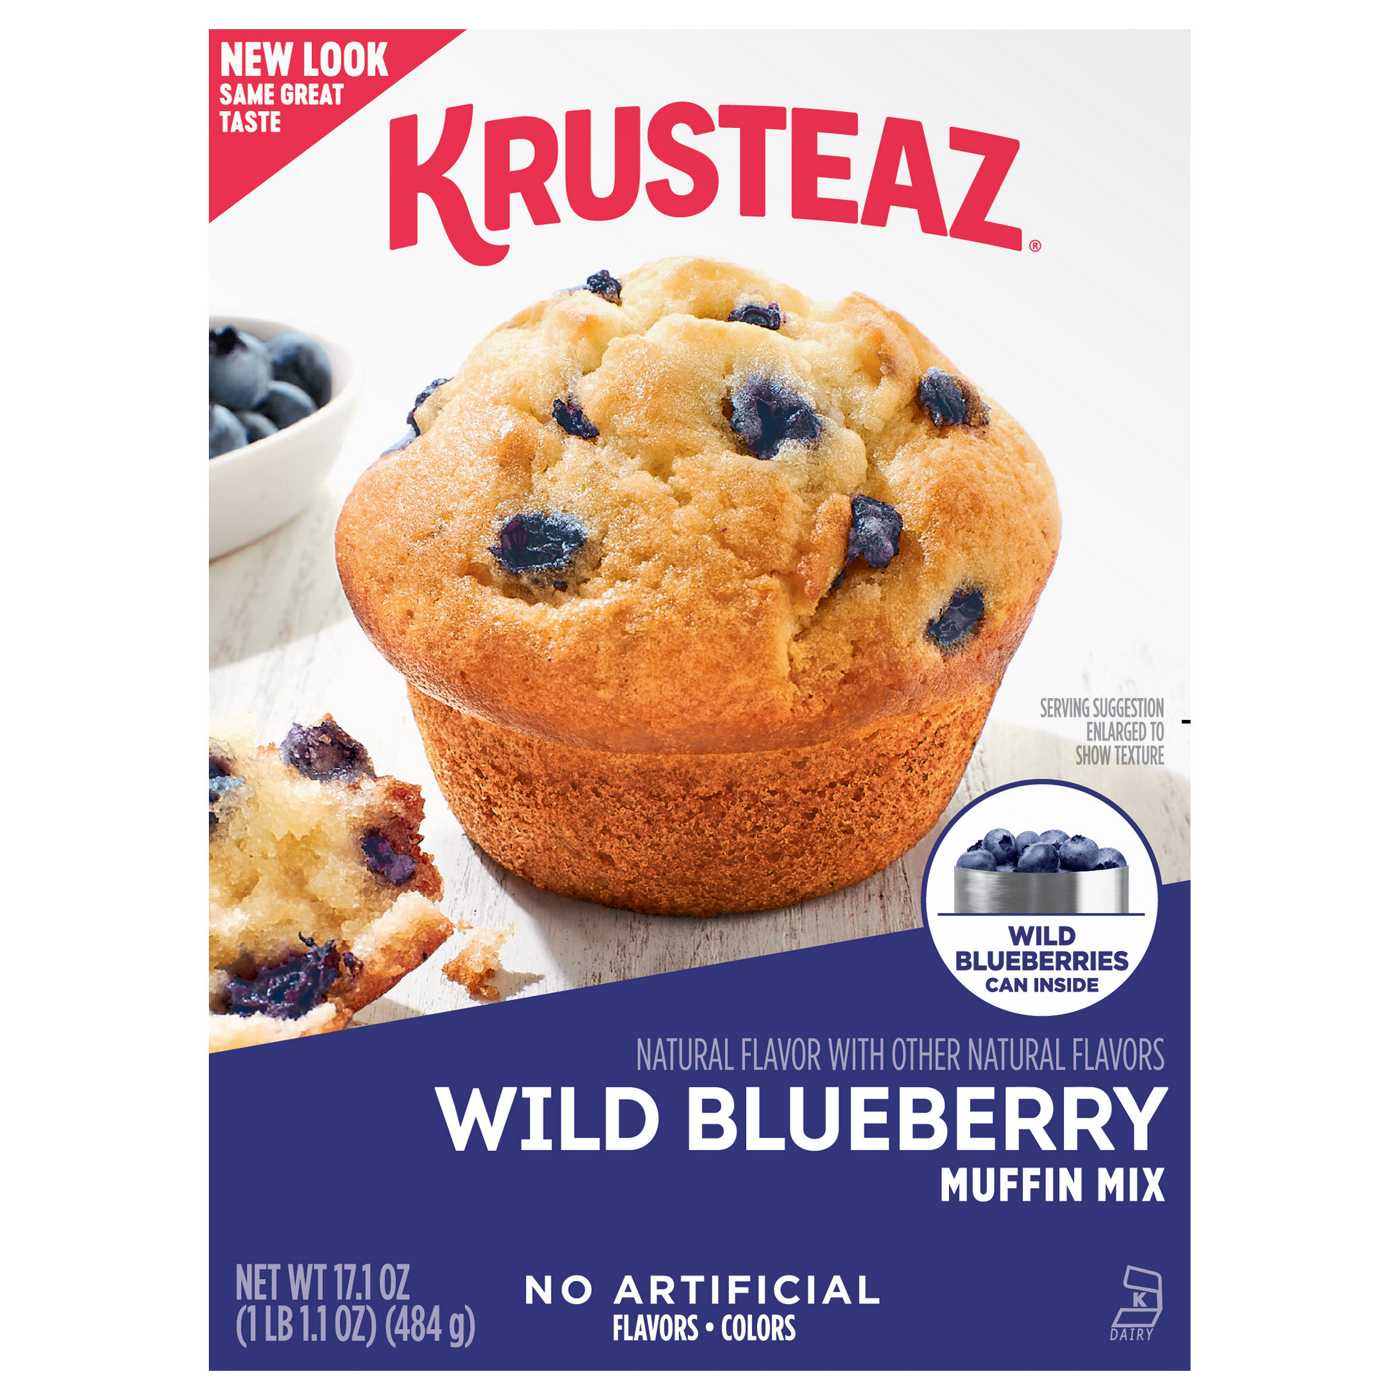 Krusteaz Wild Blueberry Muffin Mix; image 1 of 7